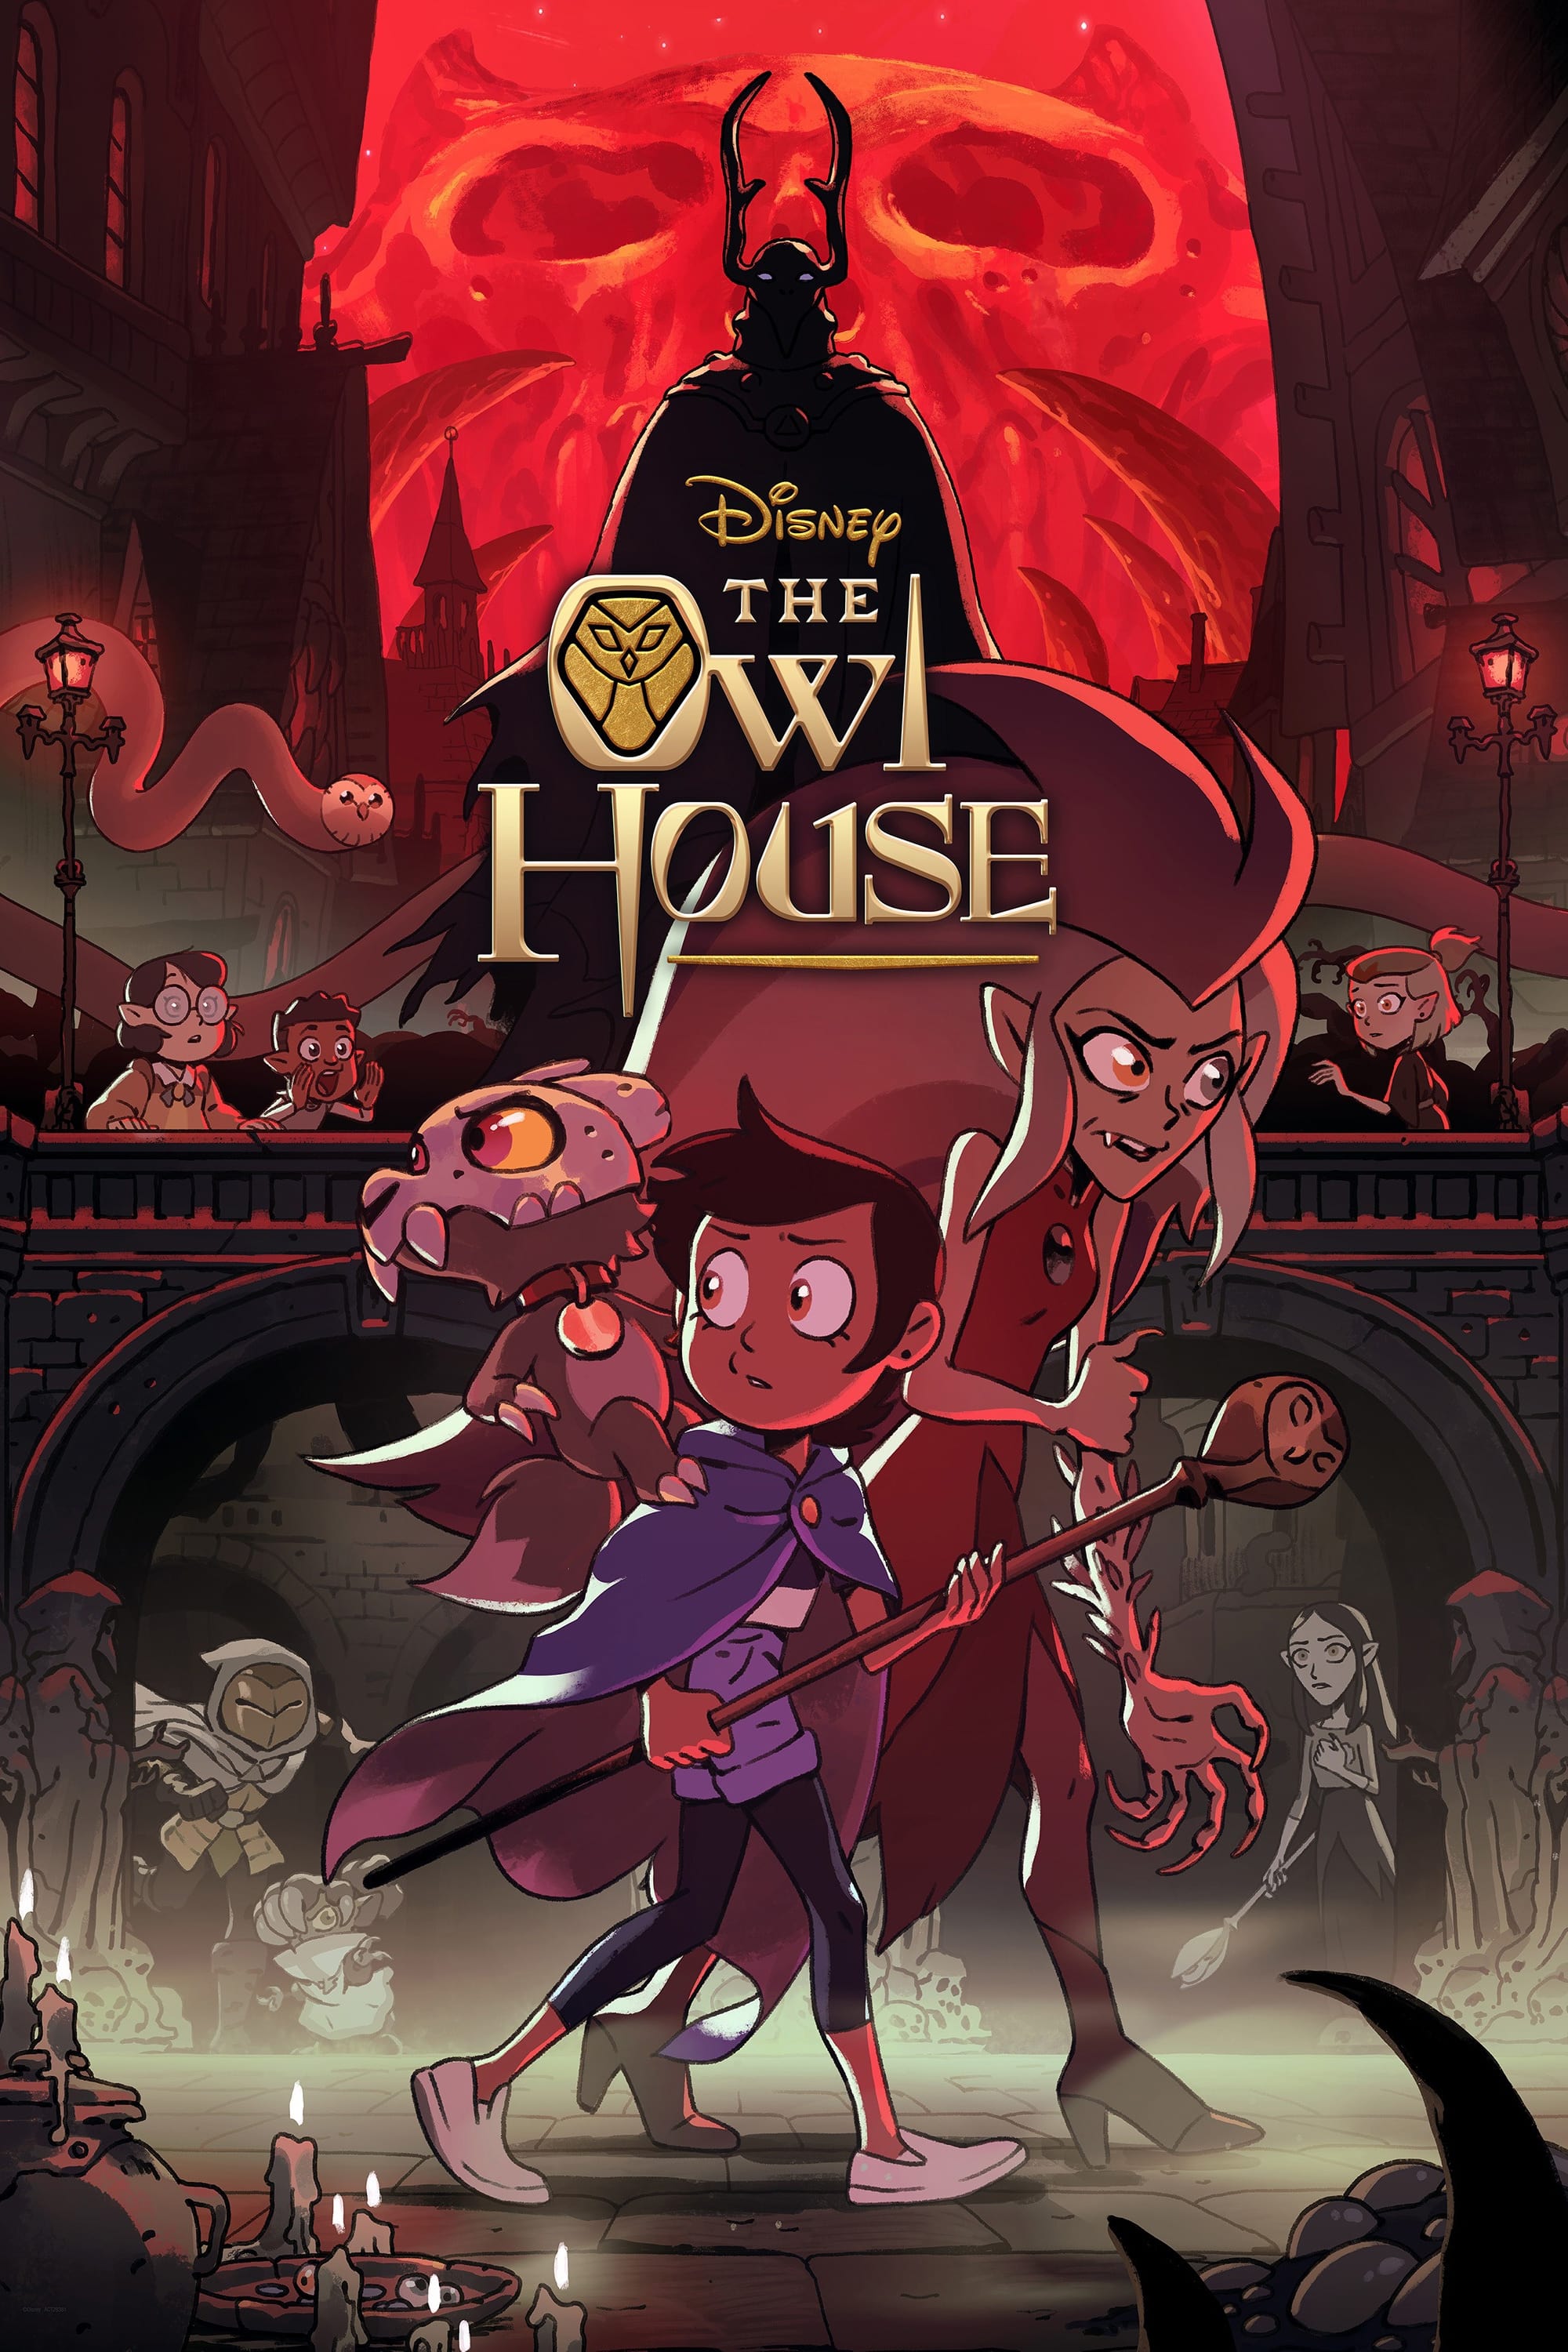 The Owl House (TV Series 2020-2023) - Posters — The Movie Database (TMDB)